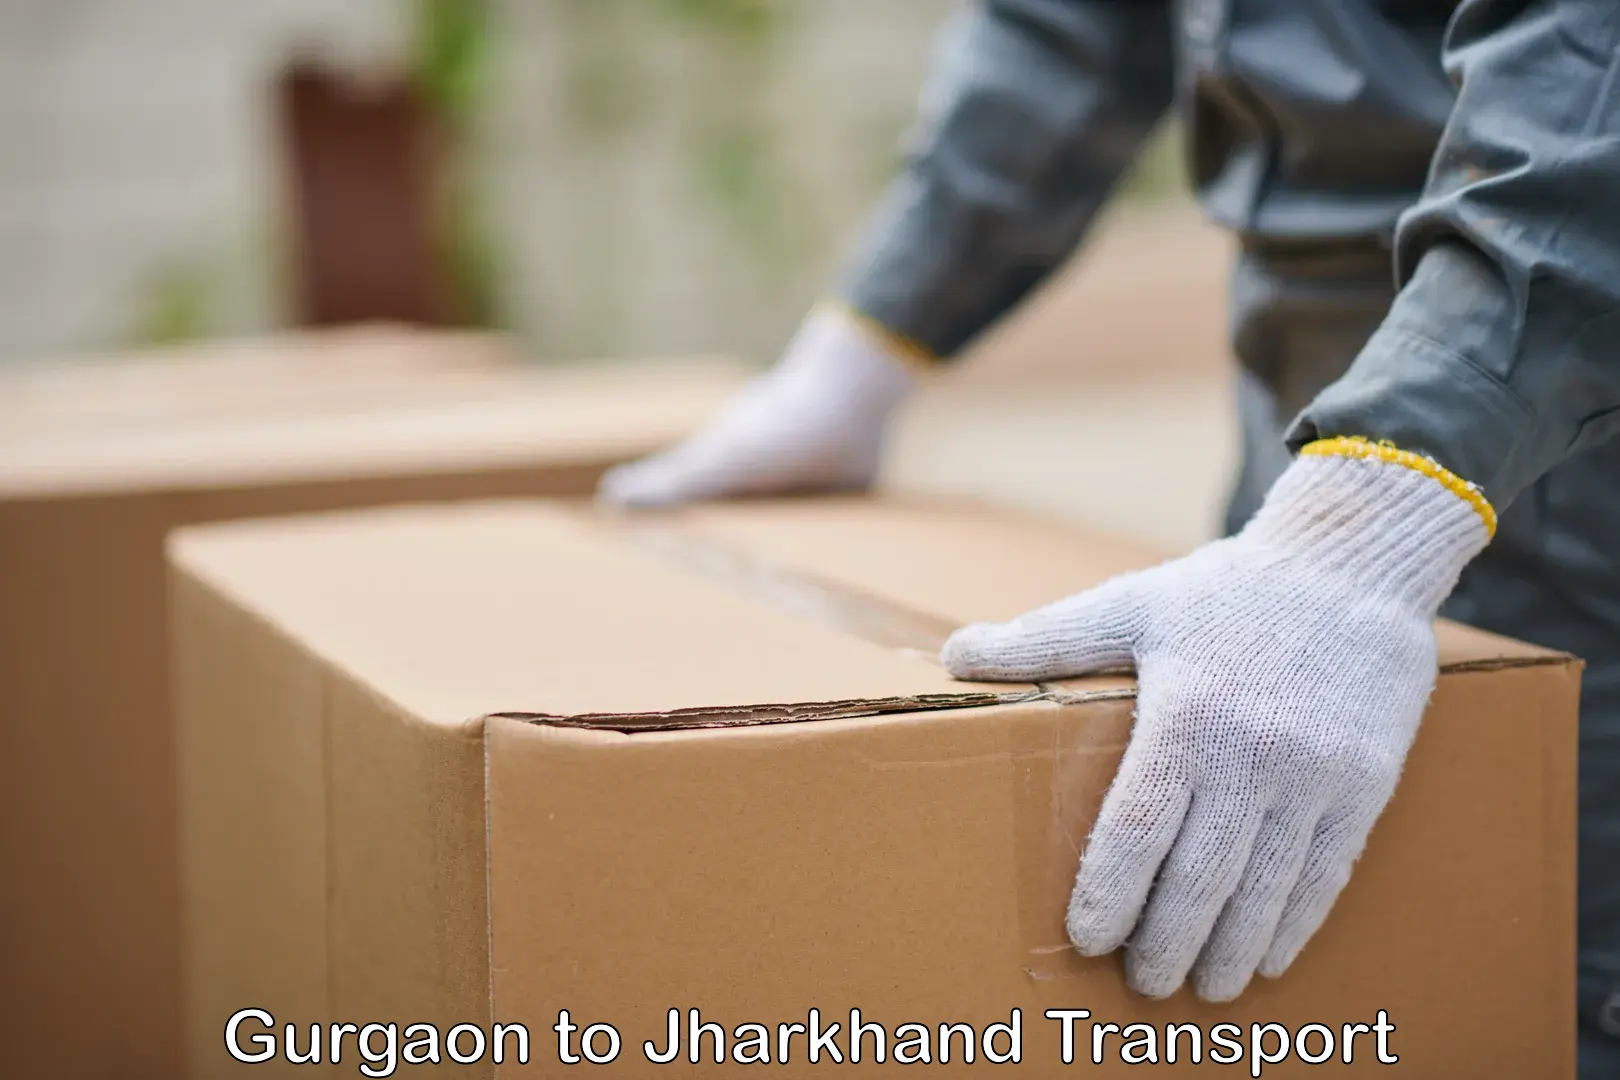 Truck transport companies in India Gurgaon to Jharkhand